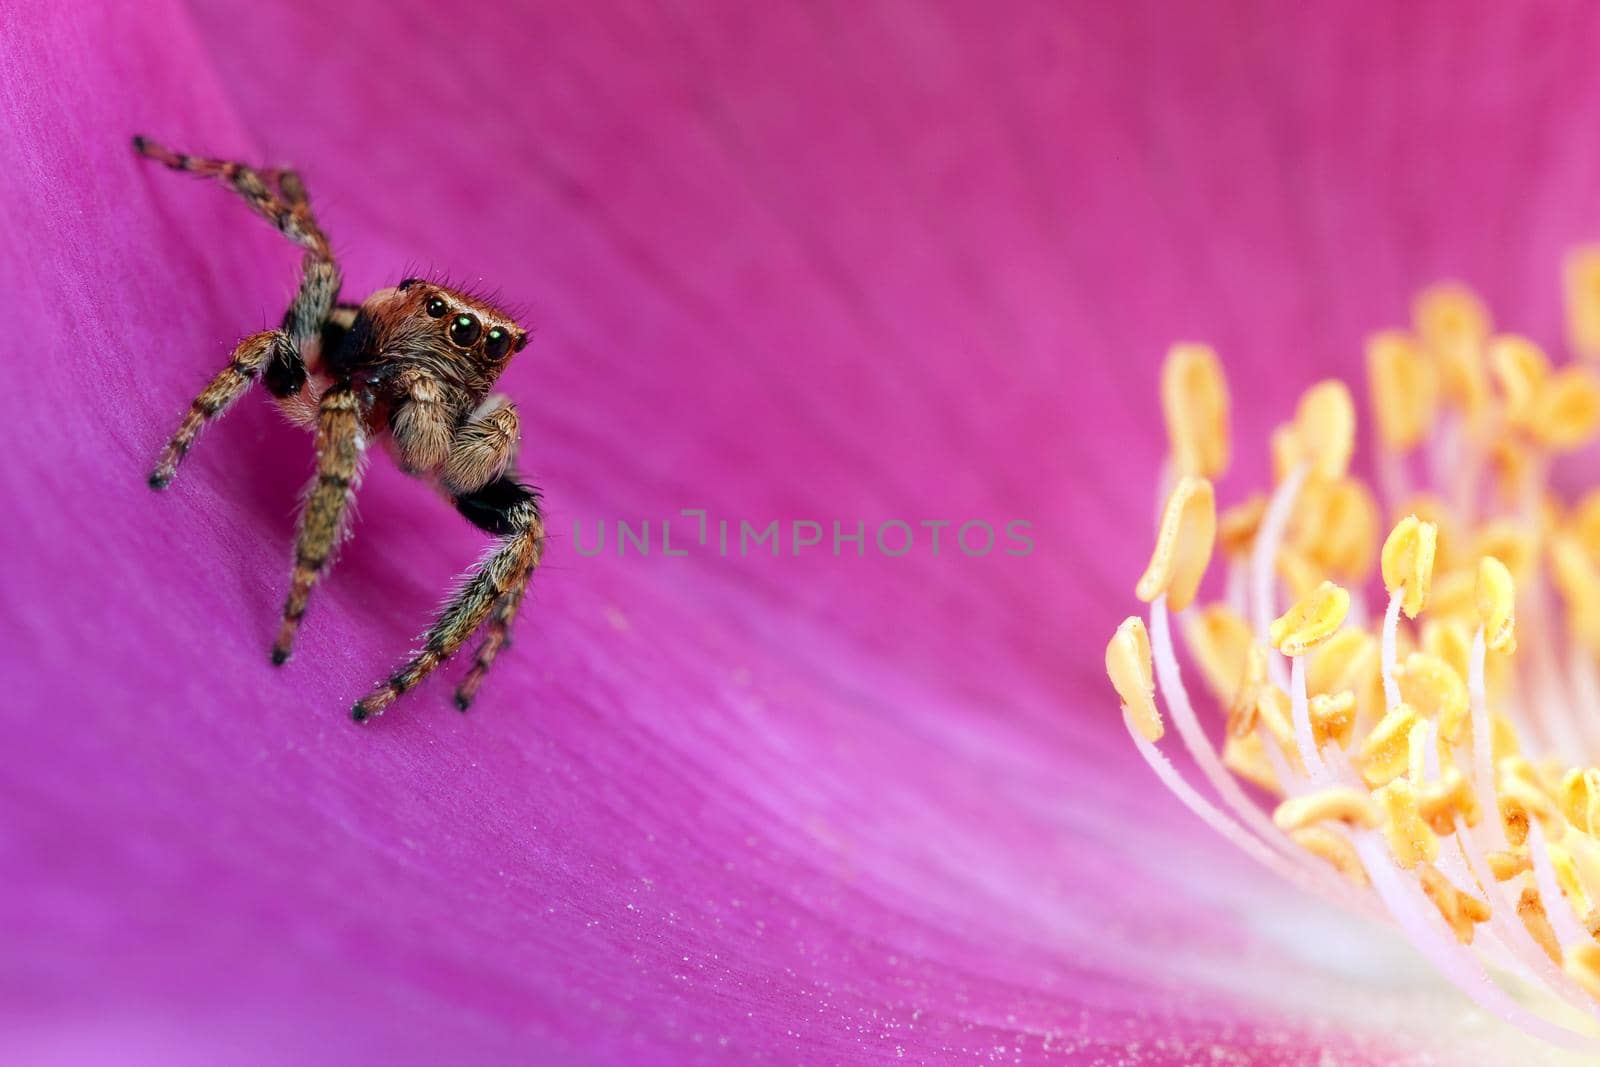 Jumping spider and pink blosom by Lincikas